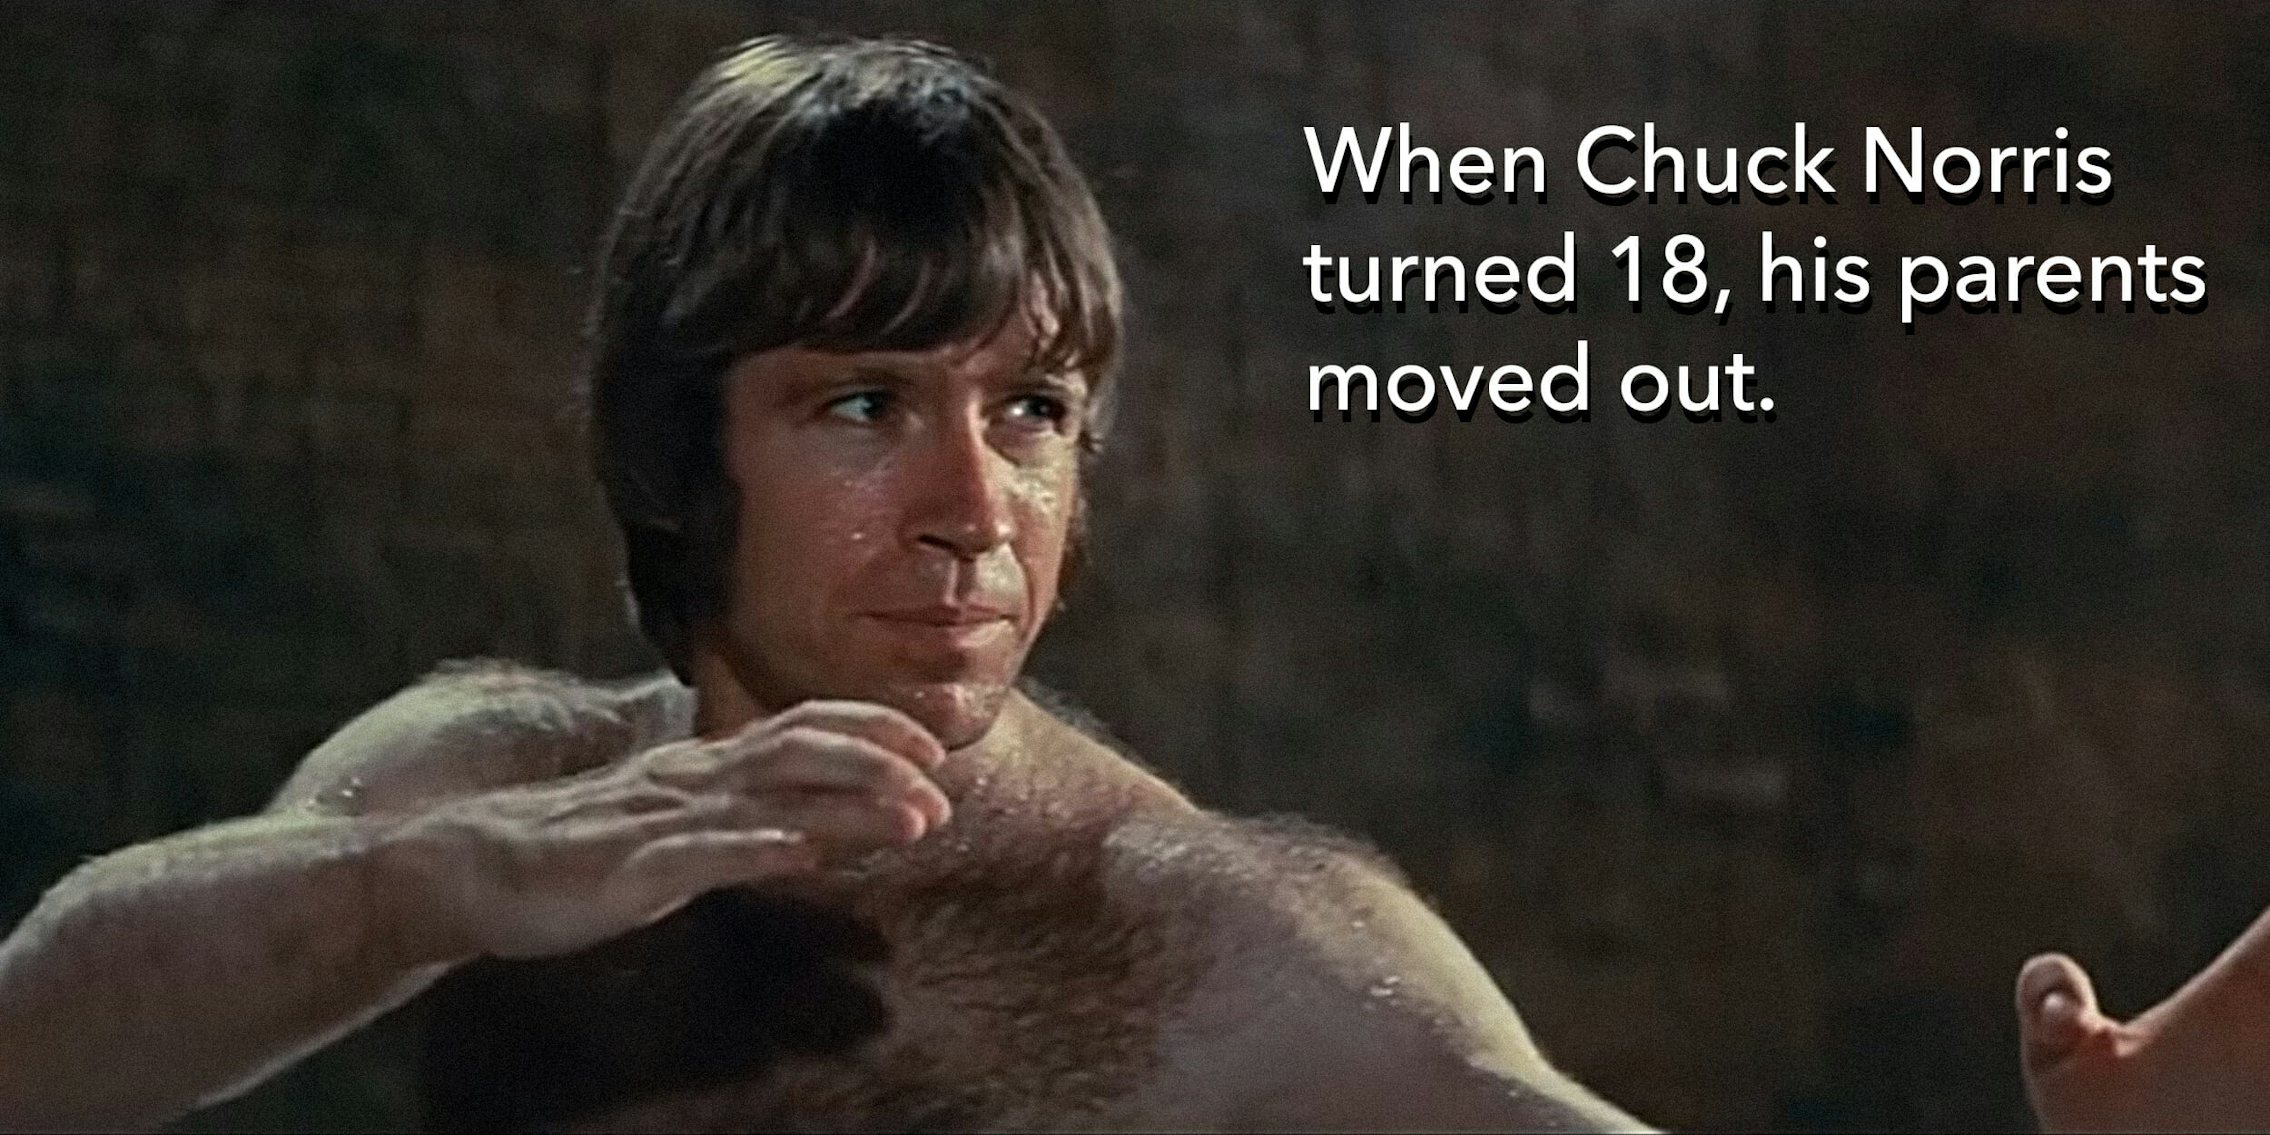 Chuck Norris in 'Way of The Dragon' with 'When Chuck Norris turned 18, his parents moved out' caption